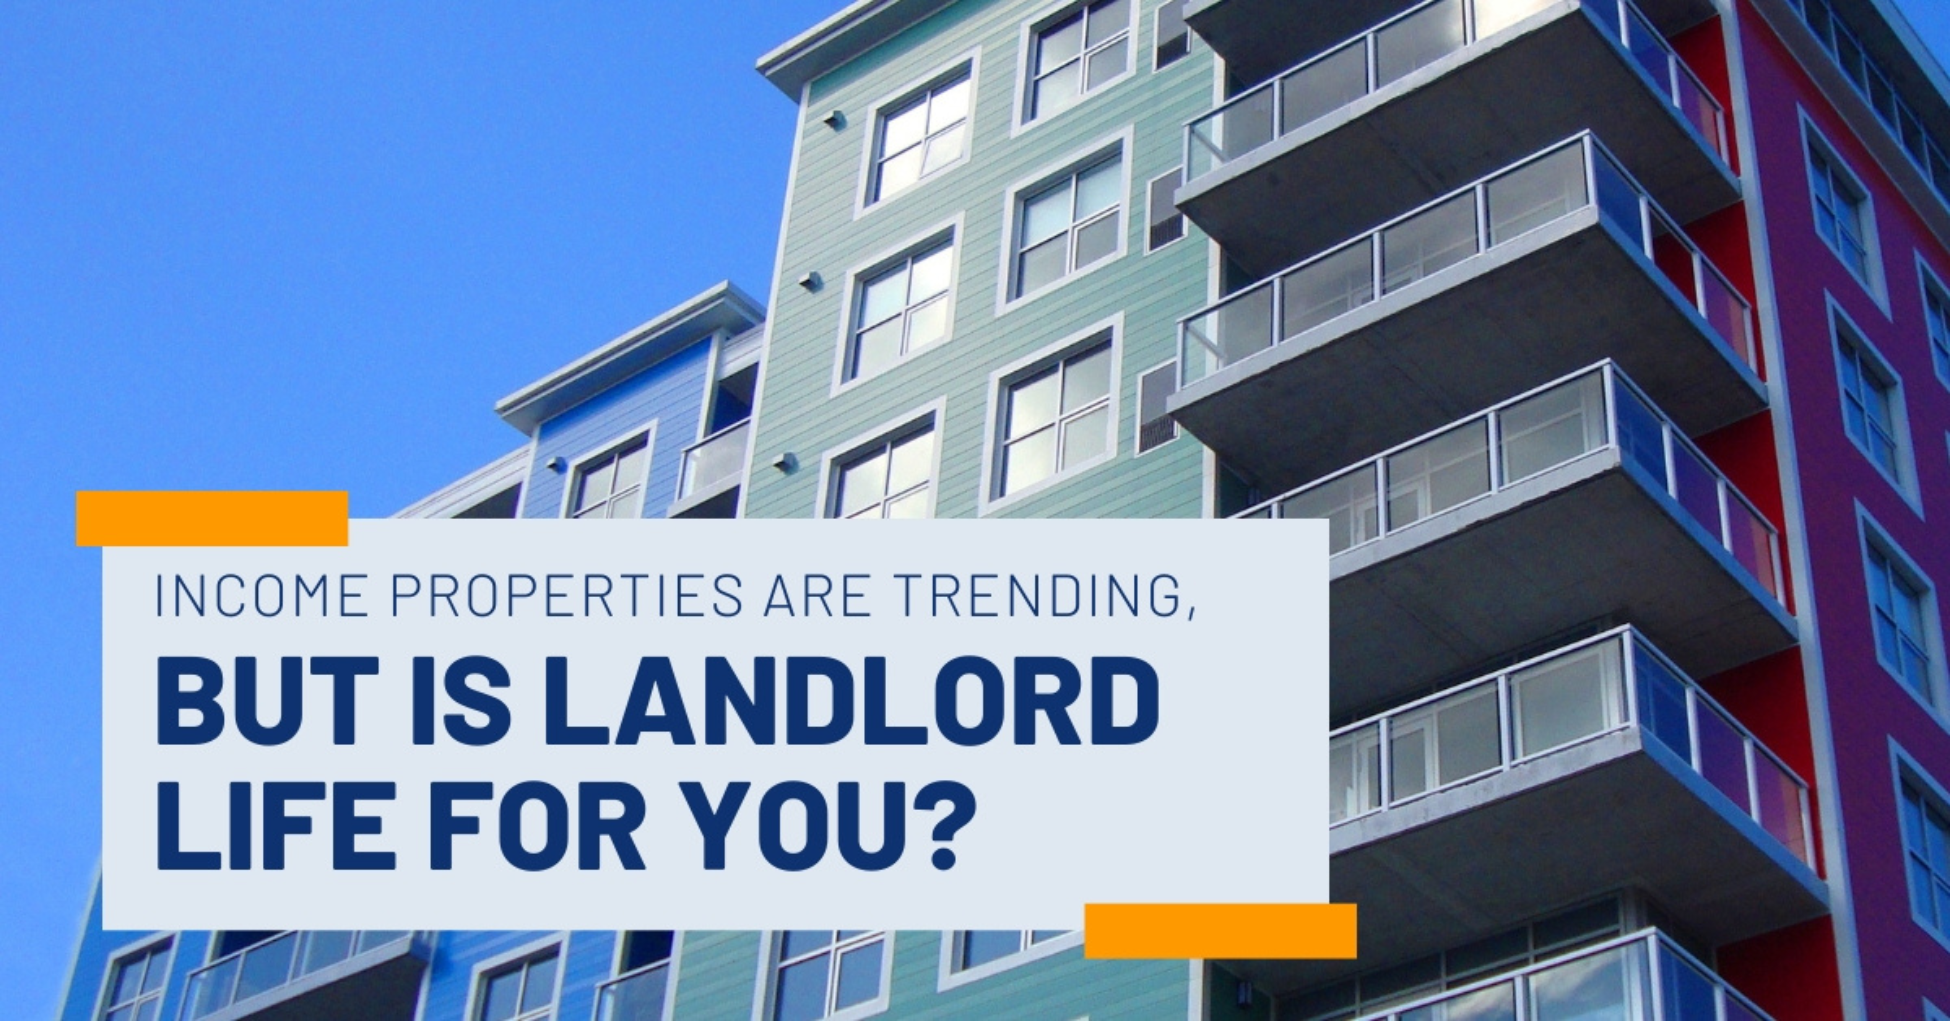 Is Landlord Life For You?